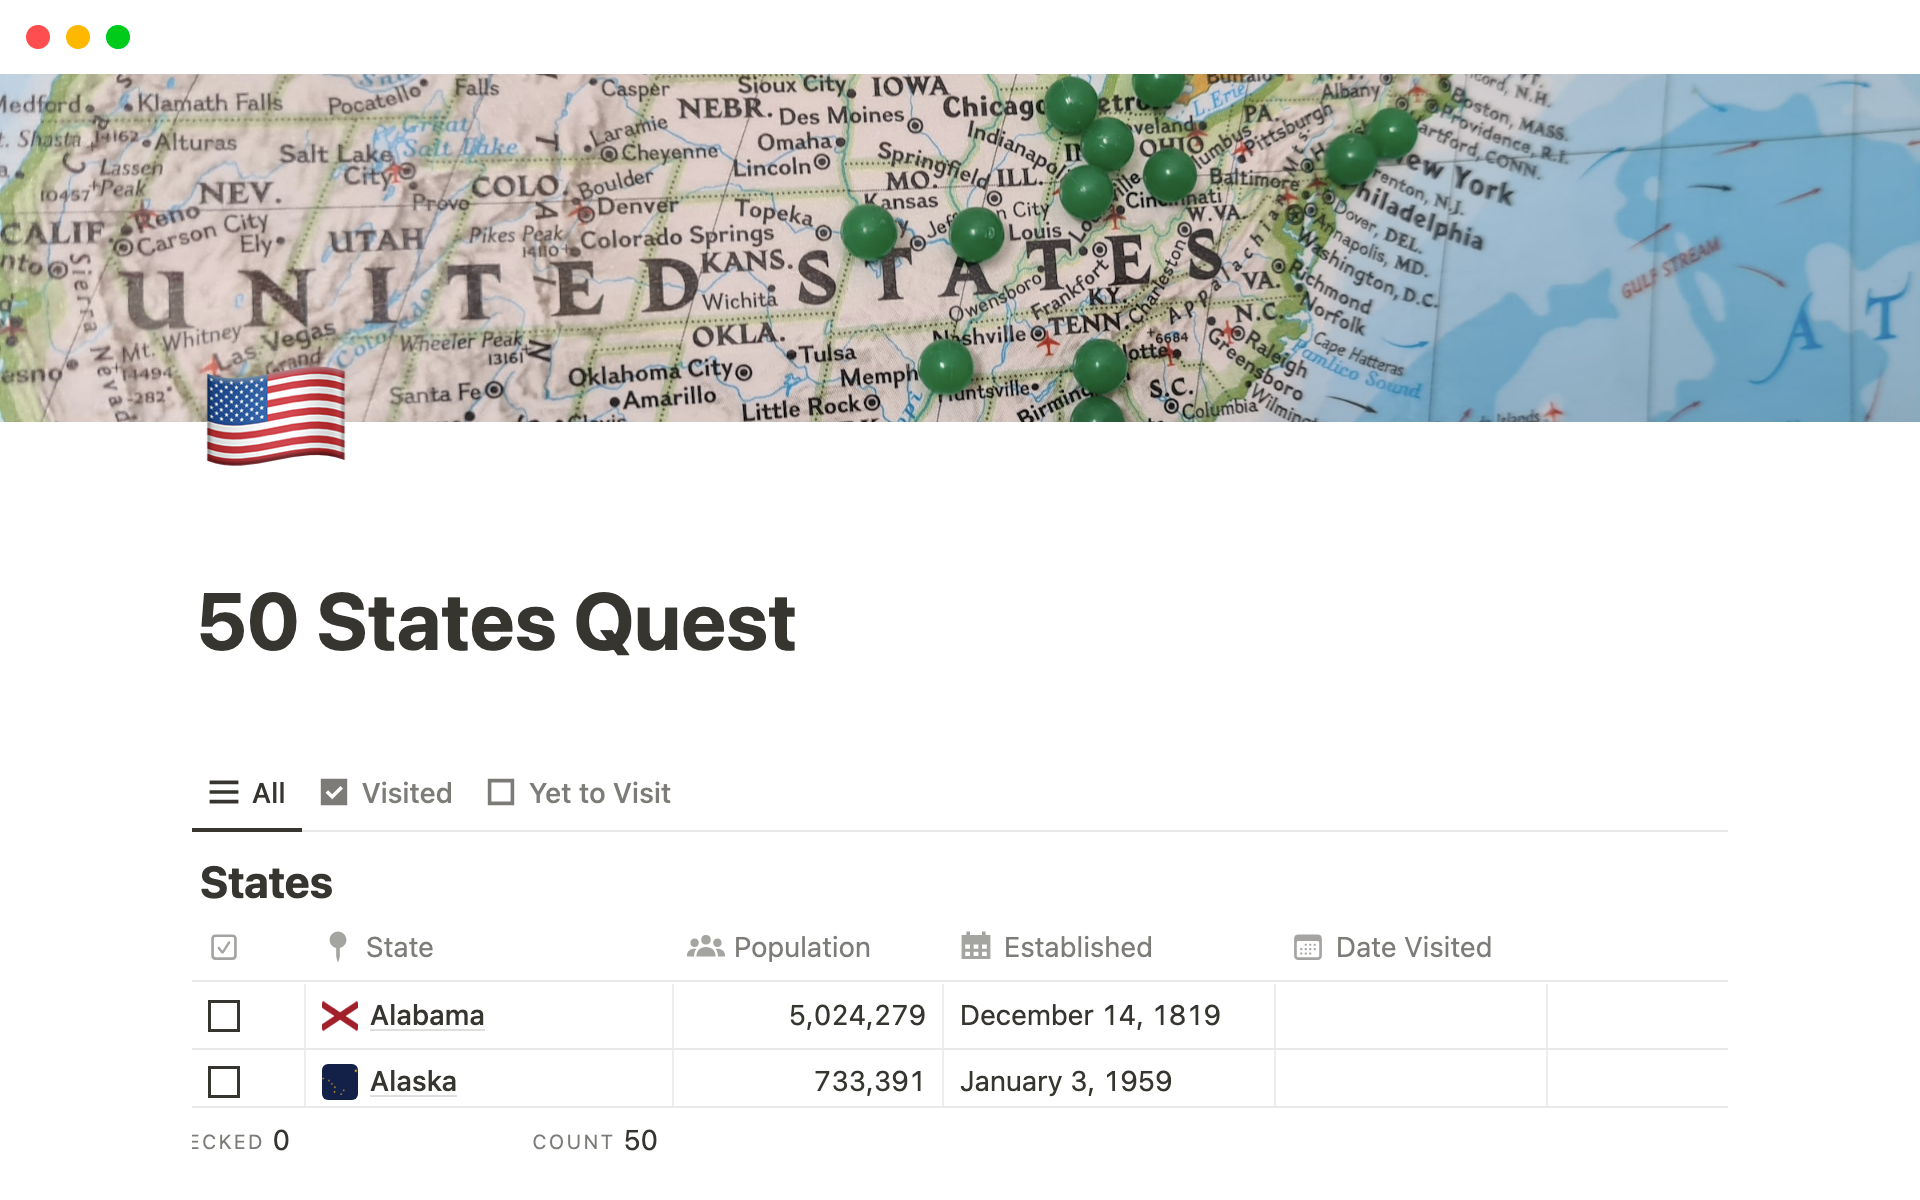 The perfect Notion tracker for your quest to visit all 50 State across America.